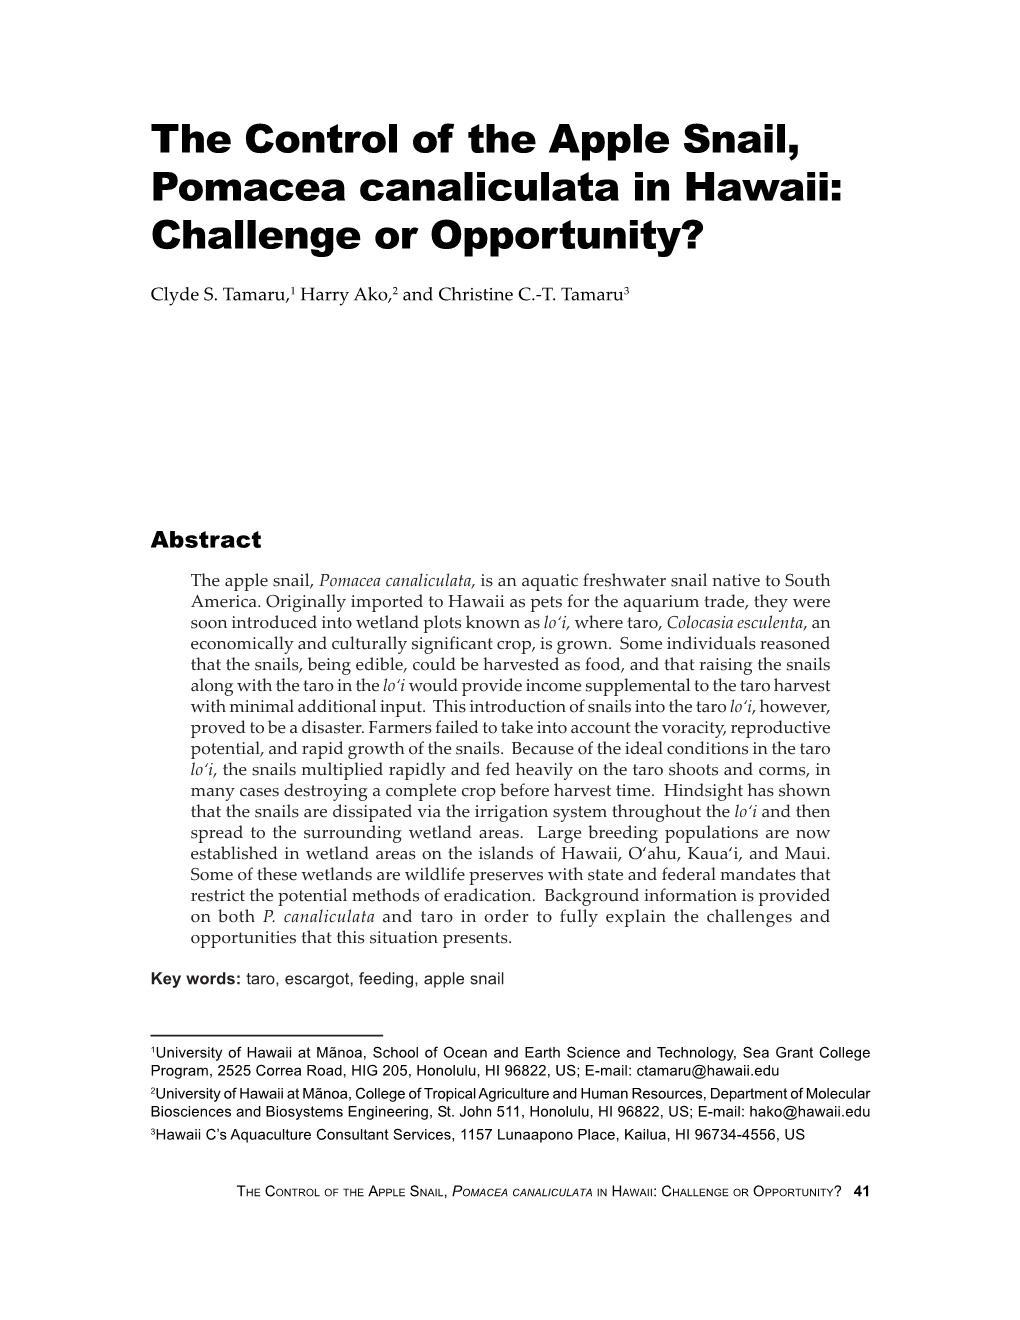 The Control of the Apple Snail, Pomacea Canaliculata in Hawaii: Challenge Or Opportunity?